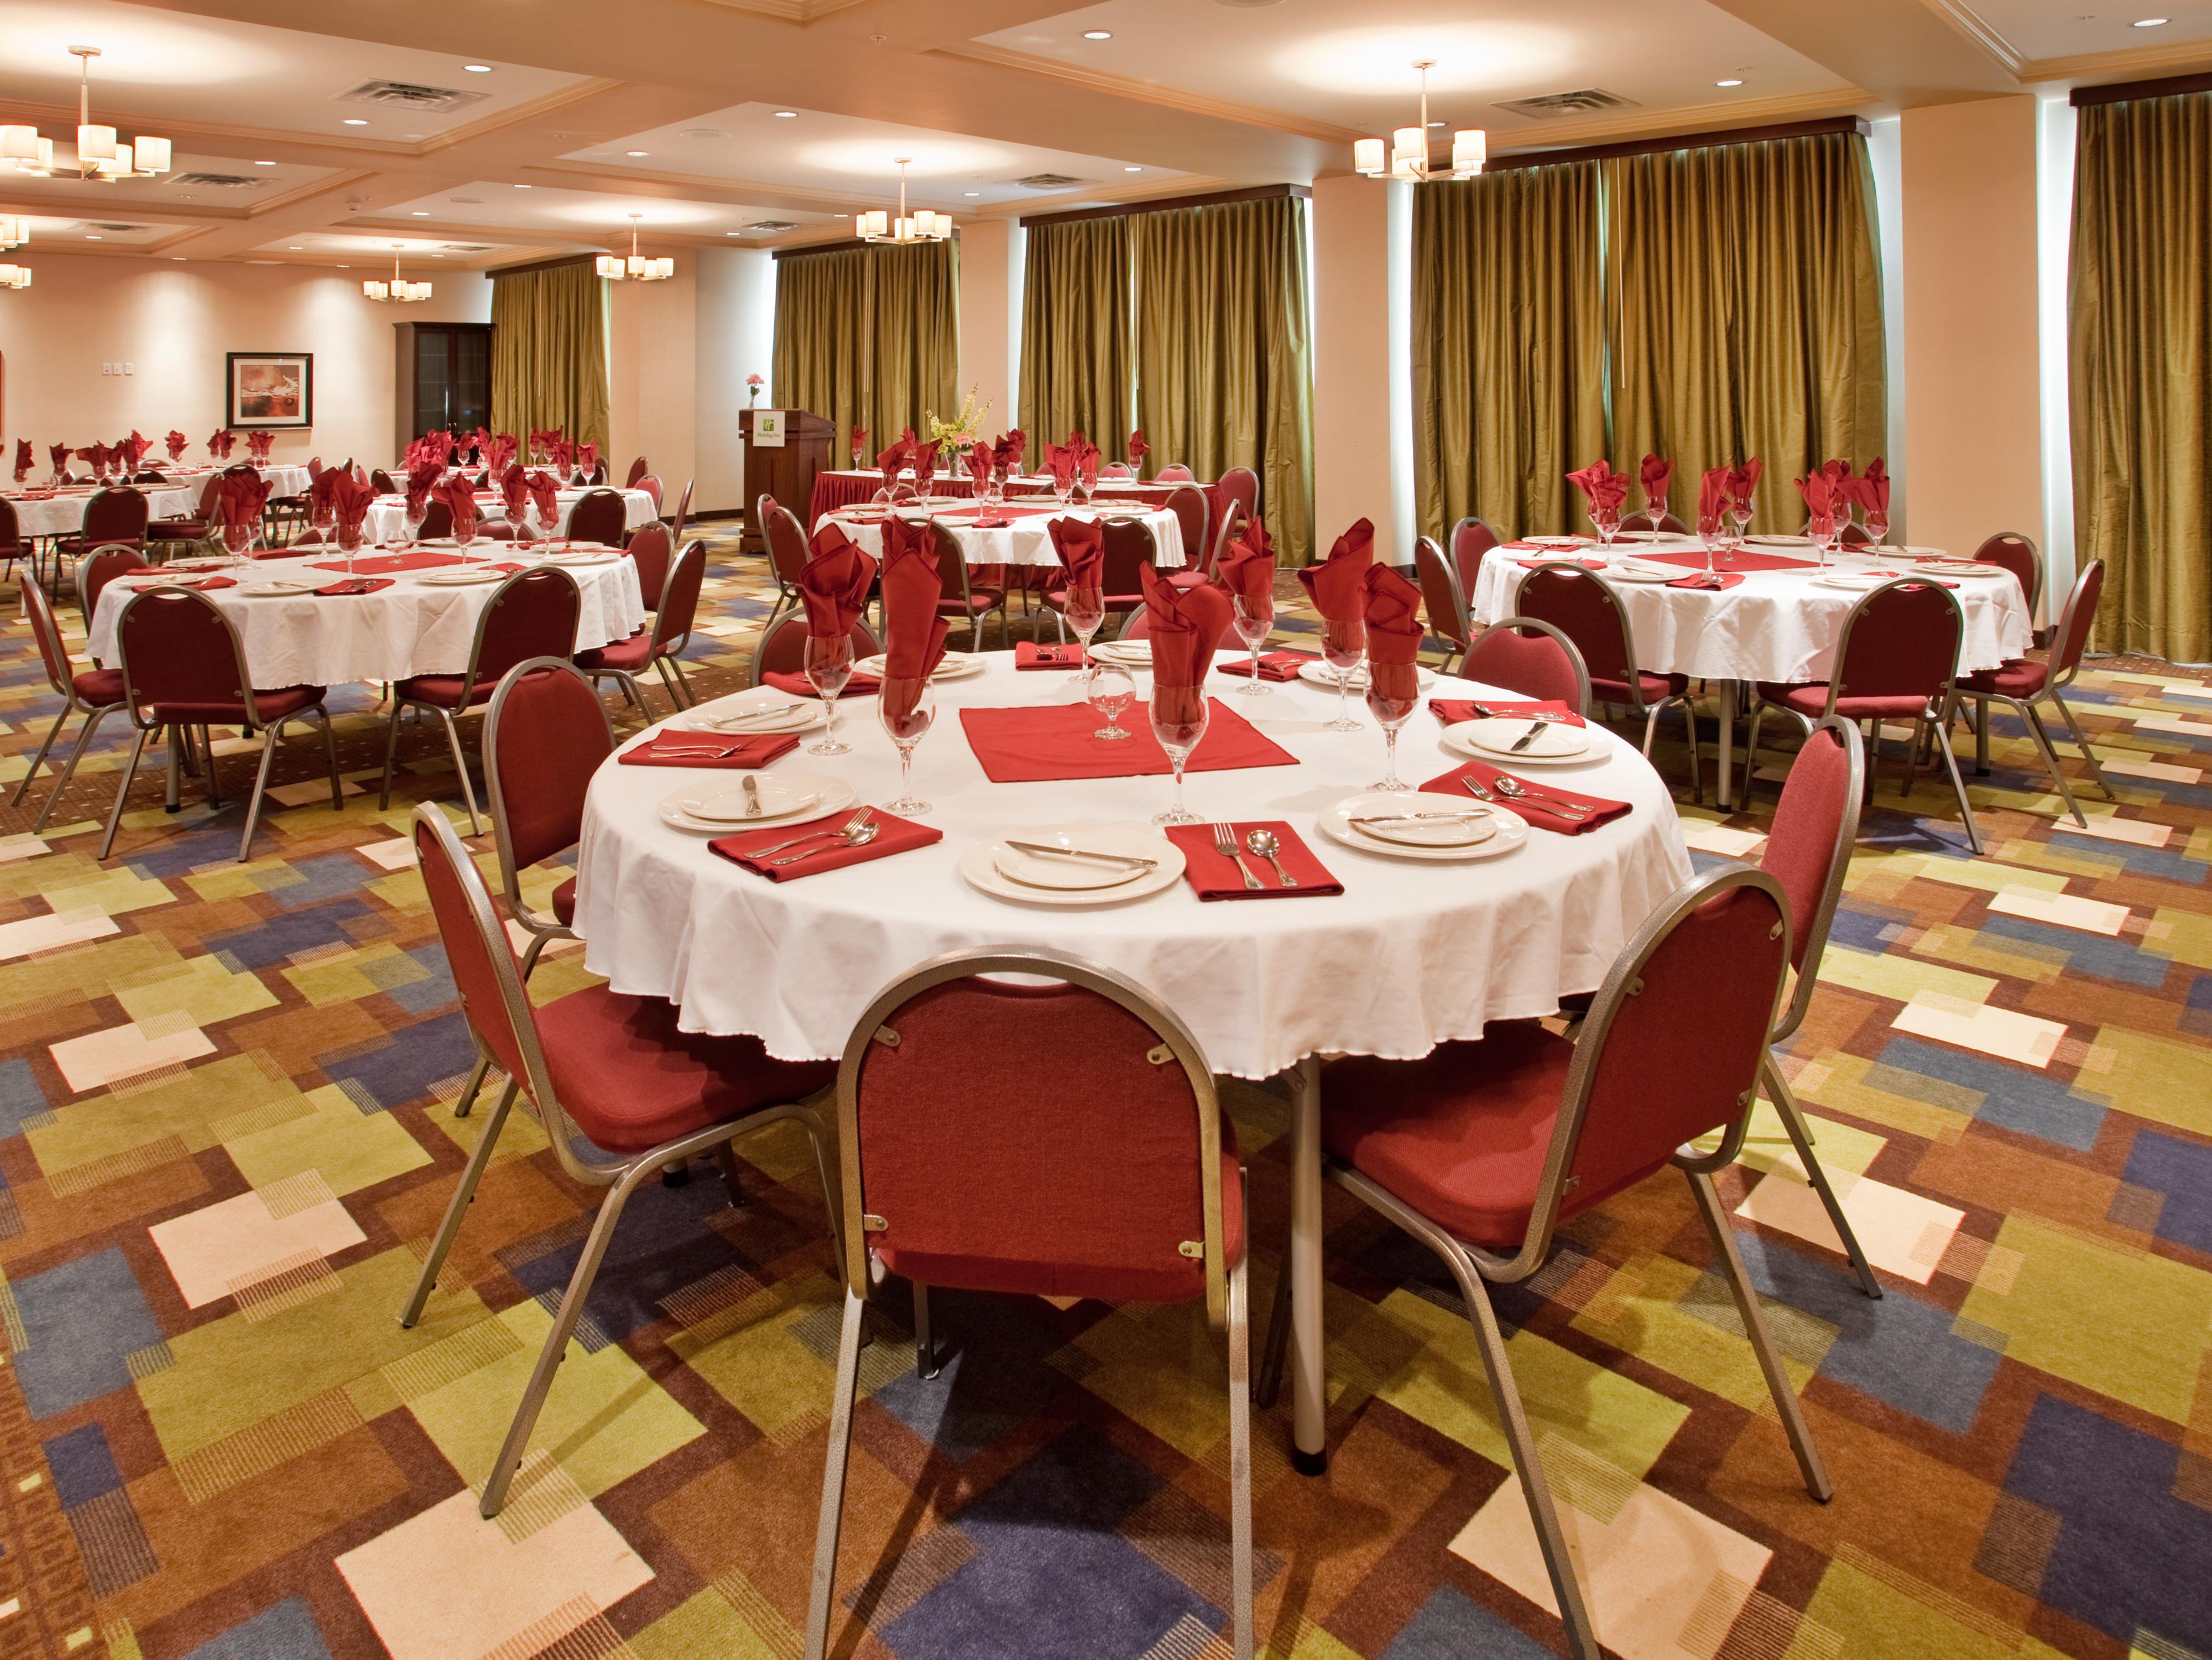 Our hotel features a 2,100 square foot ballroom with no pillars and plenty of natural lighting. 